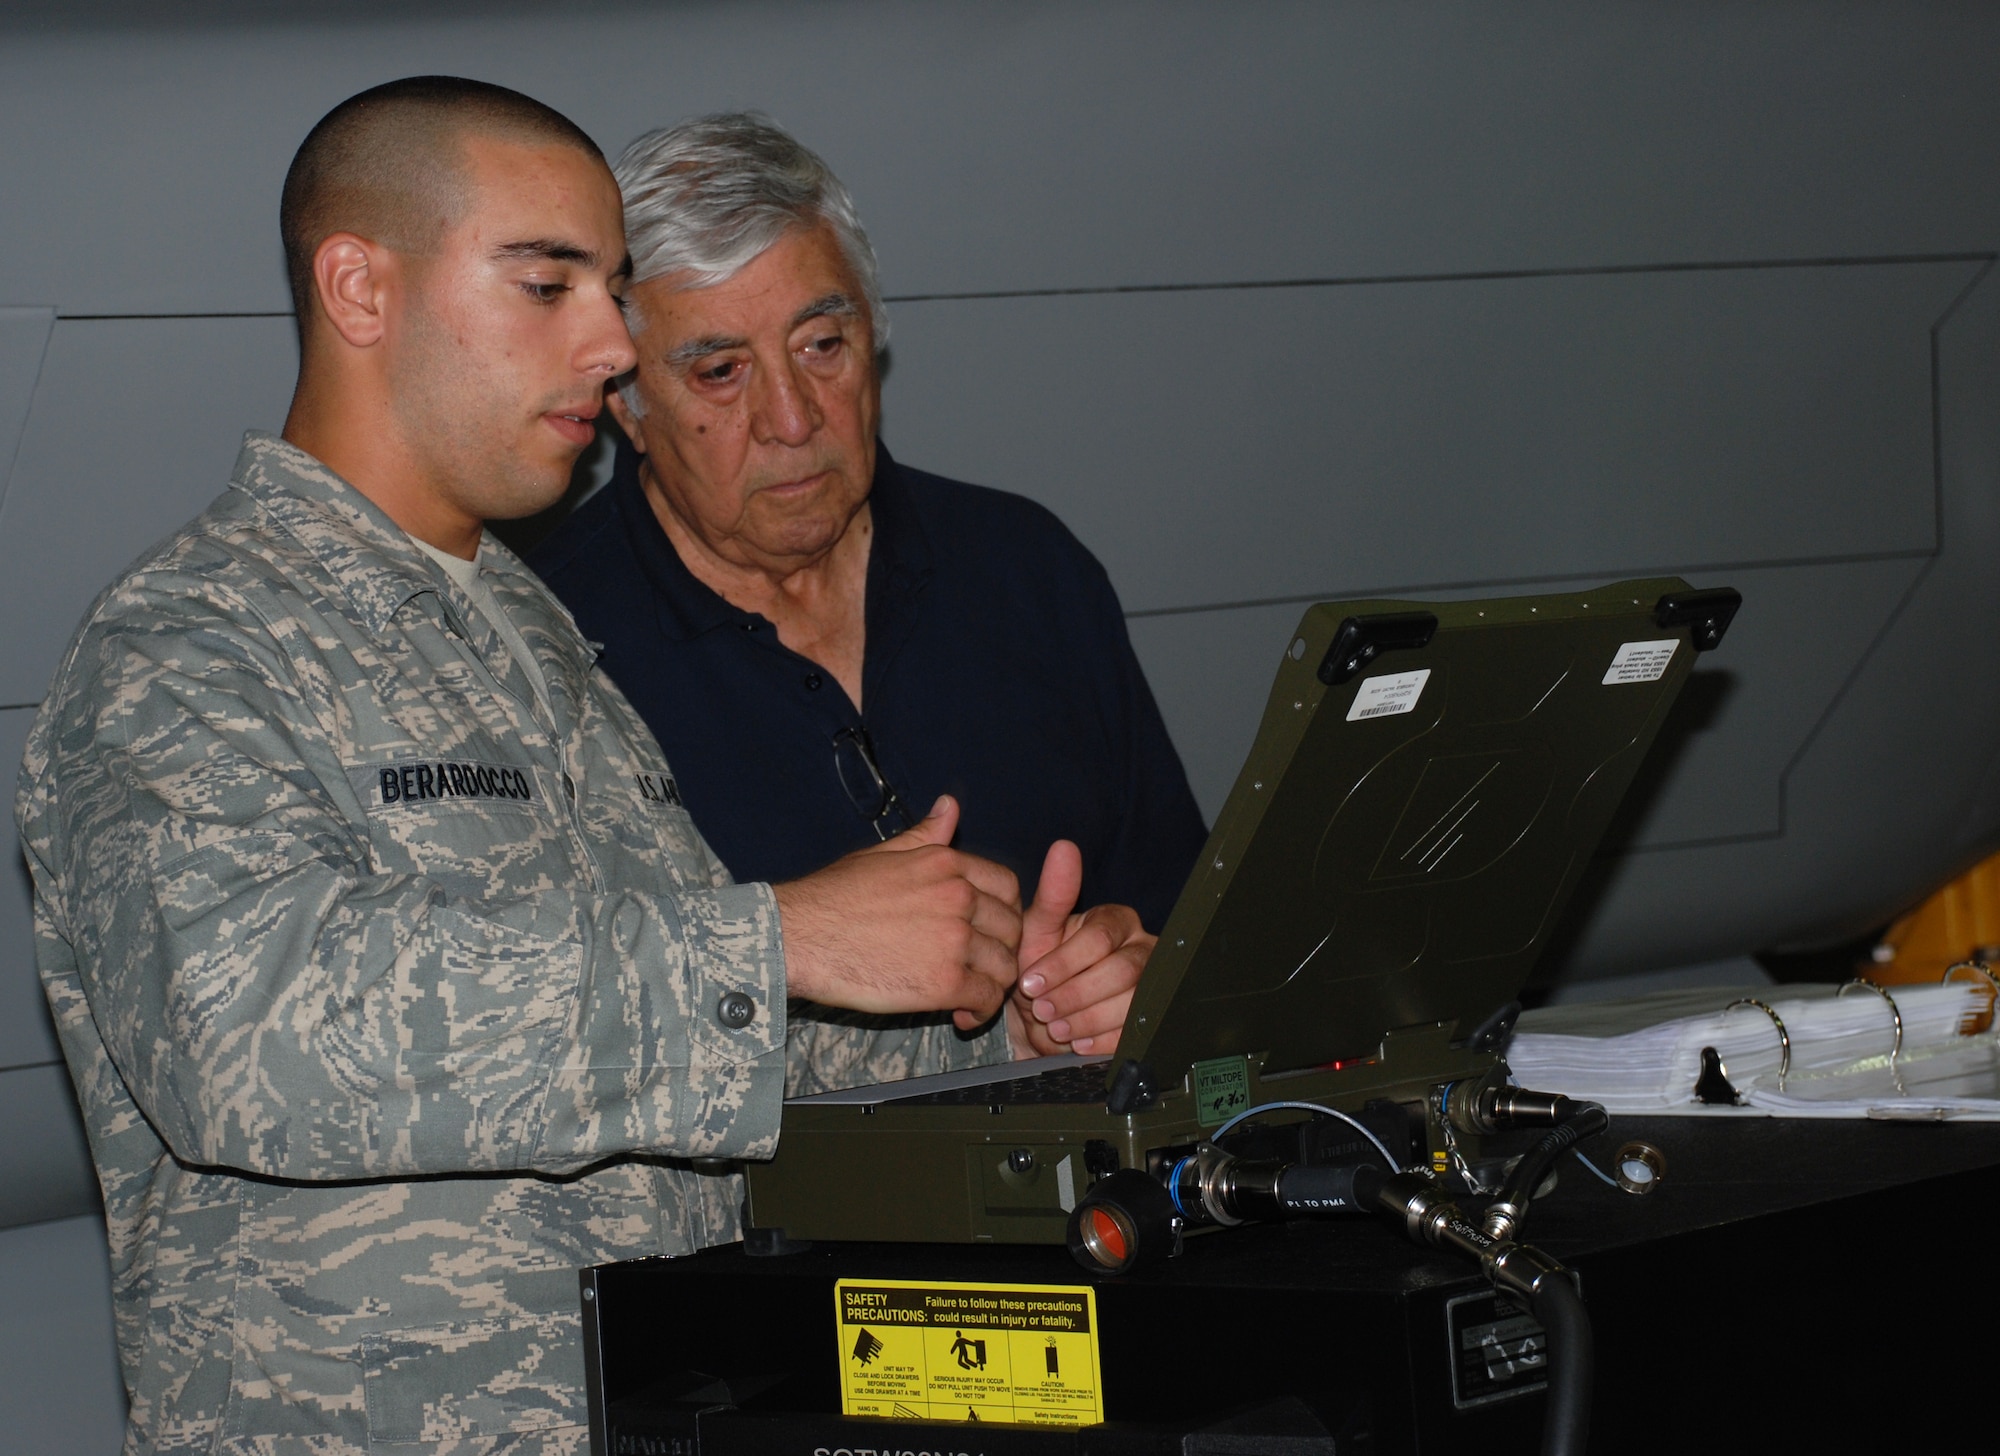 Airman Anthony Barardocco, a student from the 363rd Training Squadron, shows Lt. Gen. Leo Marquez, the former deputy chief of staff for logistics and engineering, some of his F-22 Raptor armament training. (U.S. Air Force photo/Airman 1st Class Jacob Corbin)